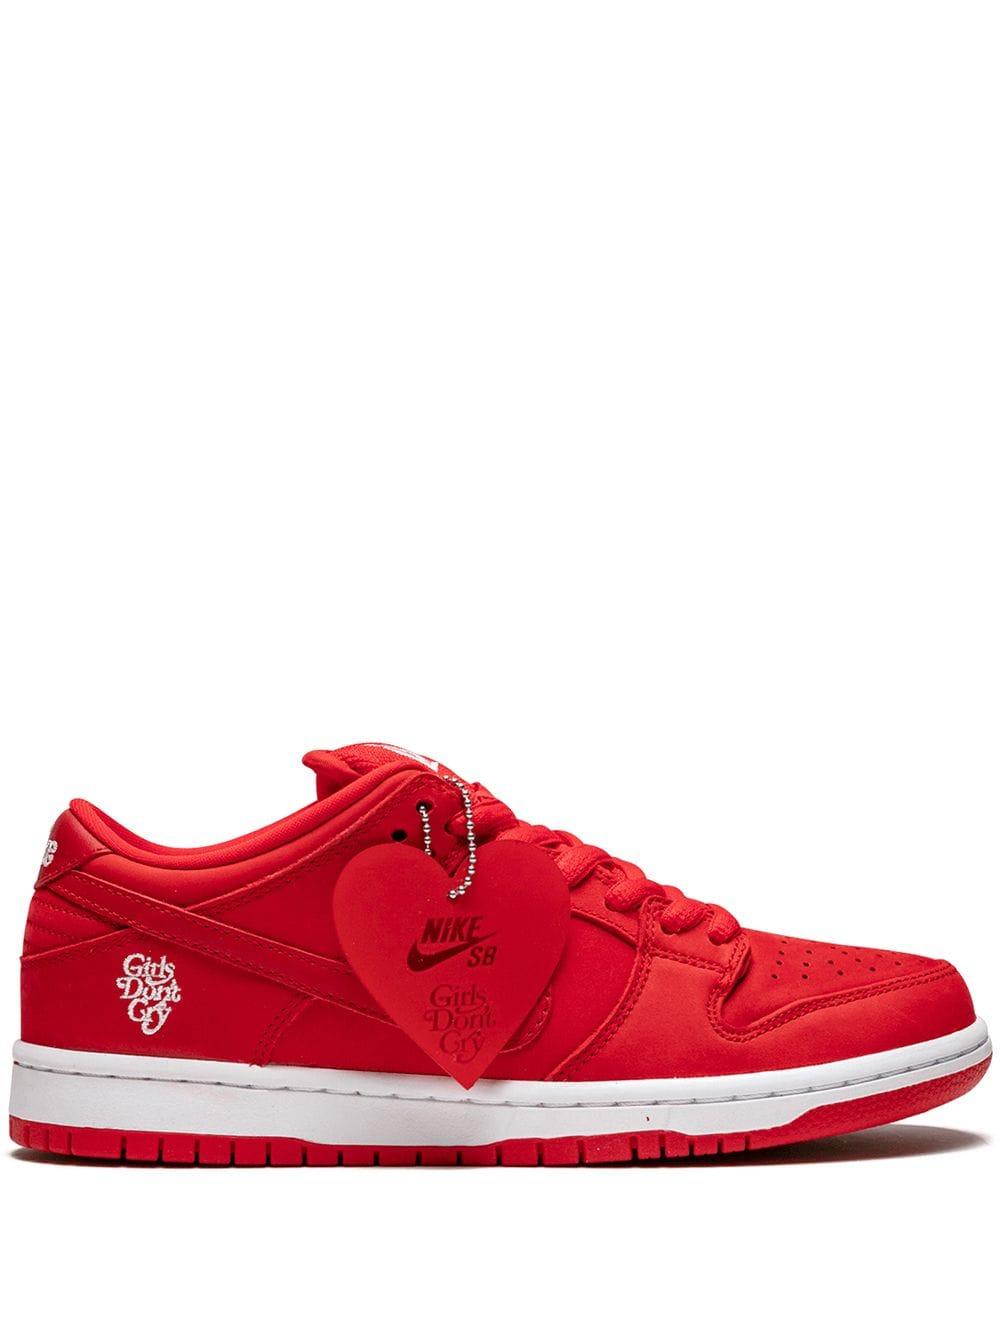 Nike Sb Dunk Low Pro Qs 'girls Don't Cry' Shoes in University Red 